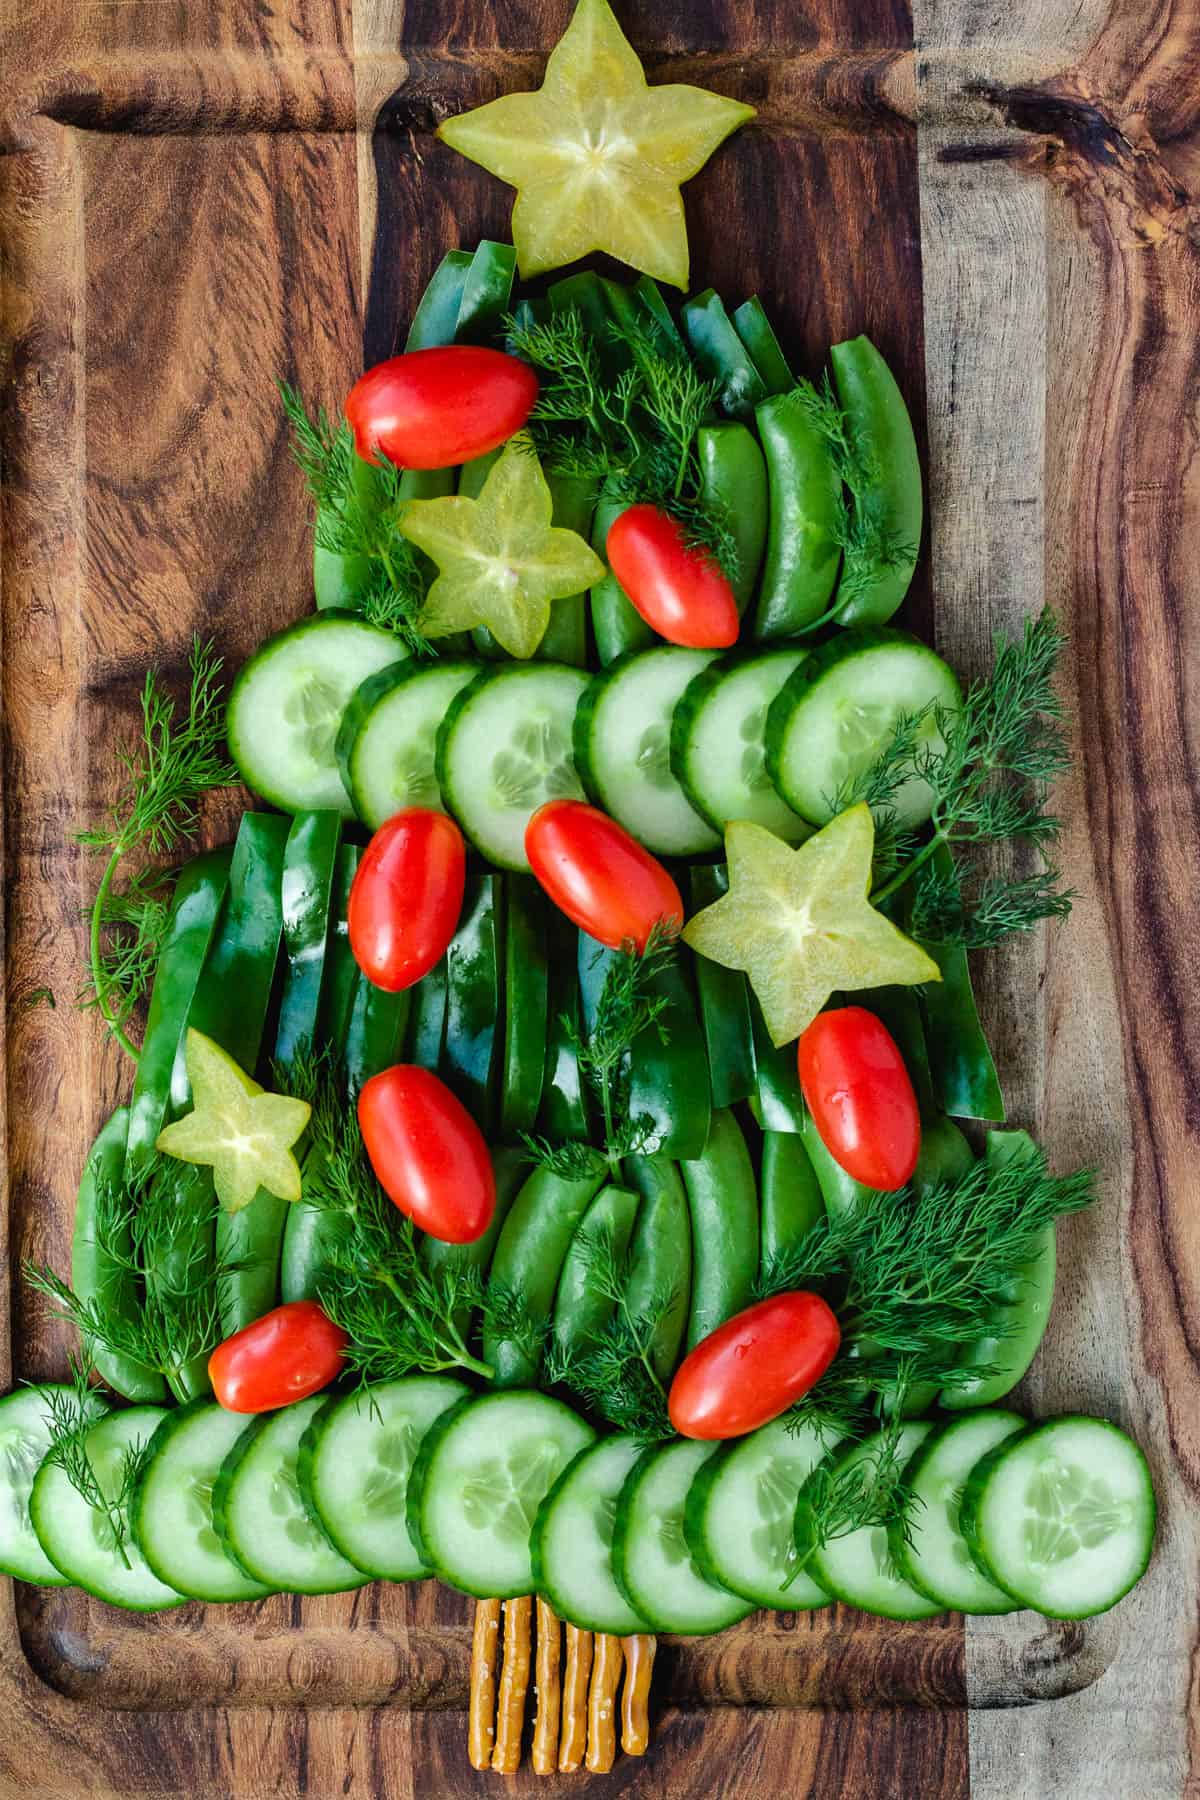 Christmas veggie tray with cucumber, green peppers, snap peas, tomatoes, dill, and starfruit